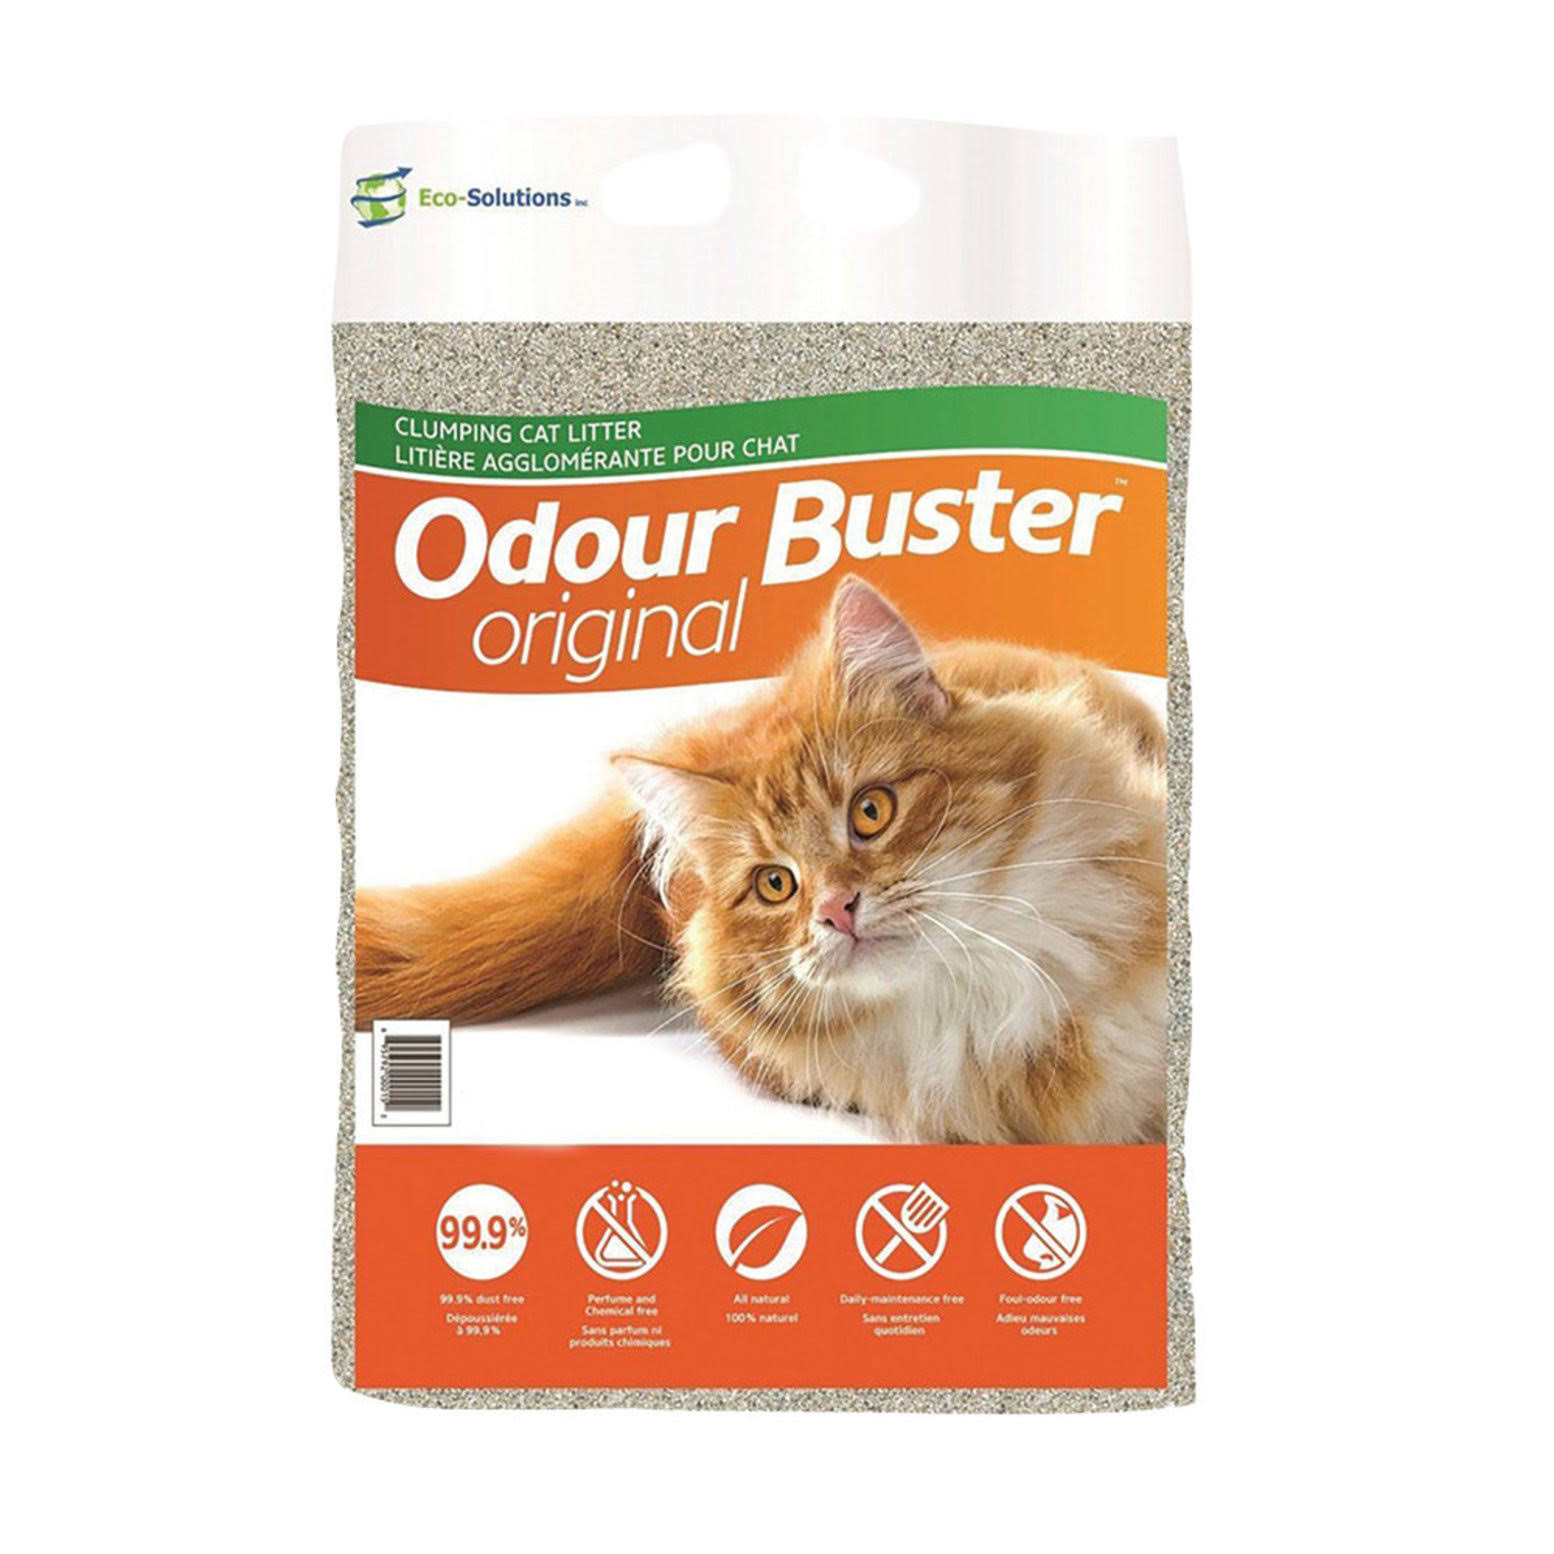 Eco-Solutions Odour Buster Organic Clumping Cat Litter - Original, 6kg